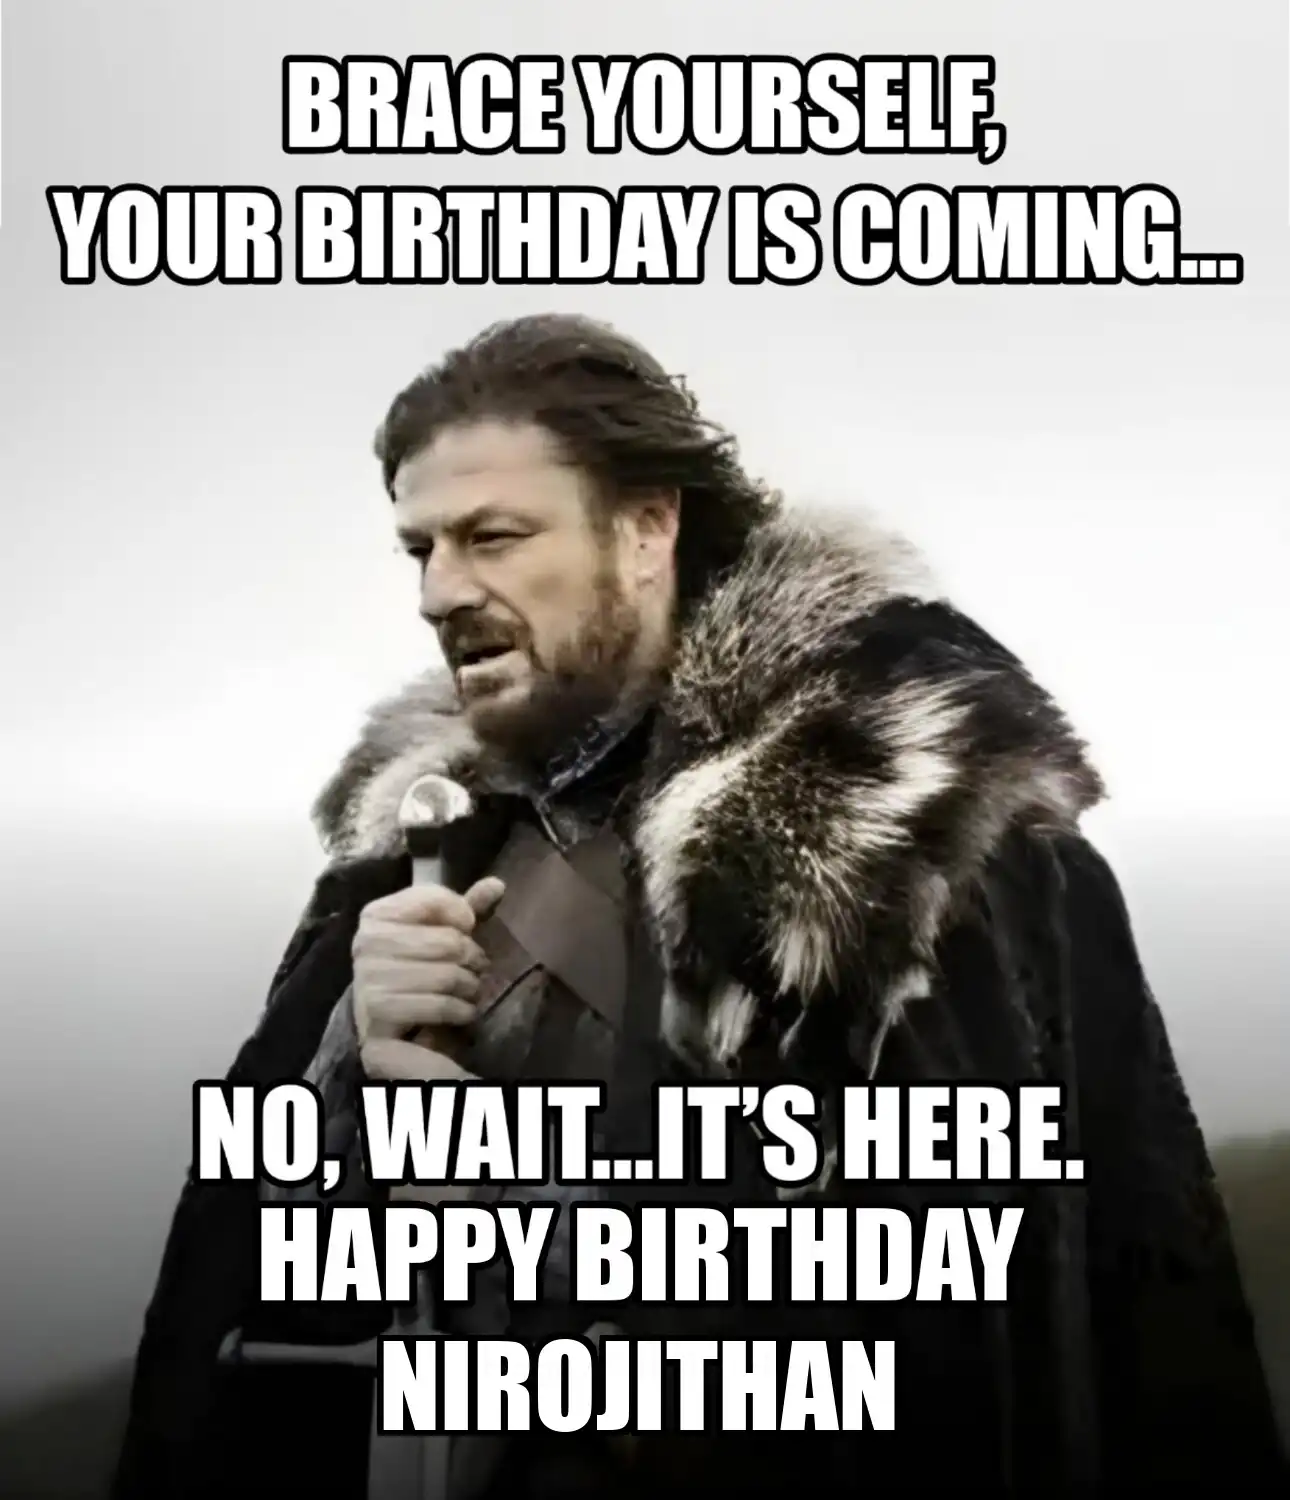 Happy Birthday Nirojithan Brace Yourself Your Birthday Is Coming Meme